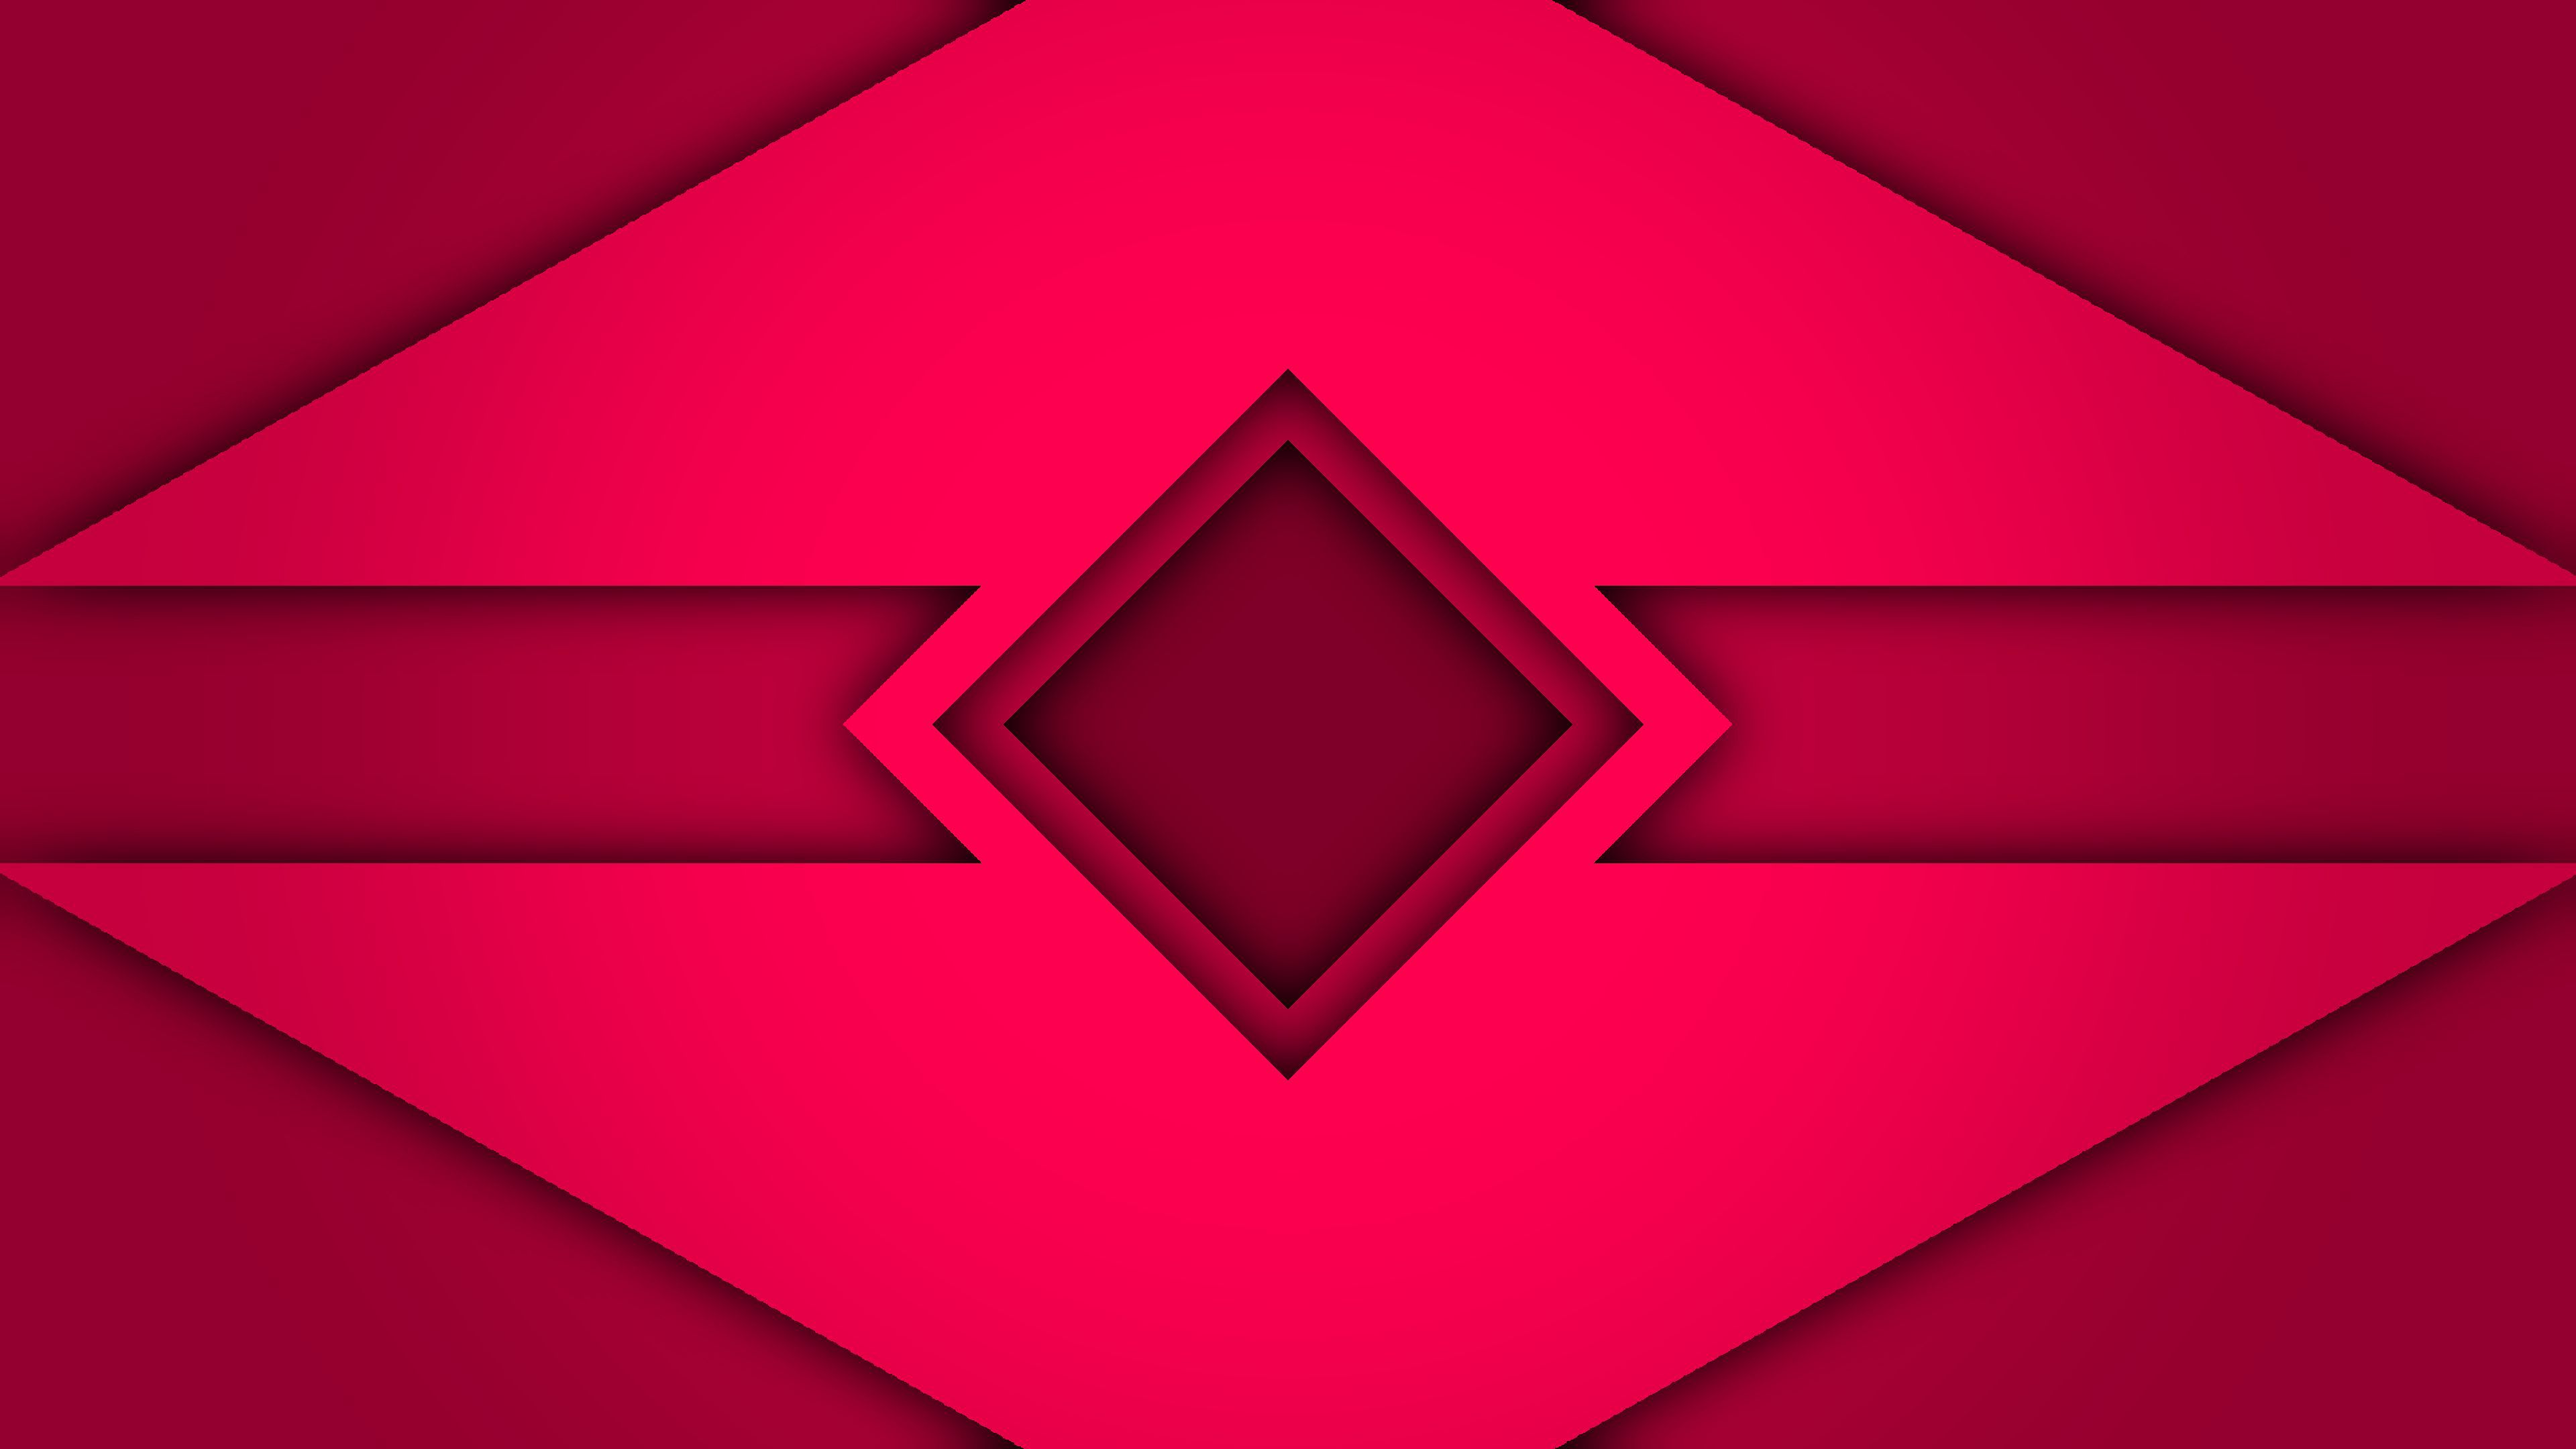 abstract, pink, rhombus images